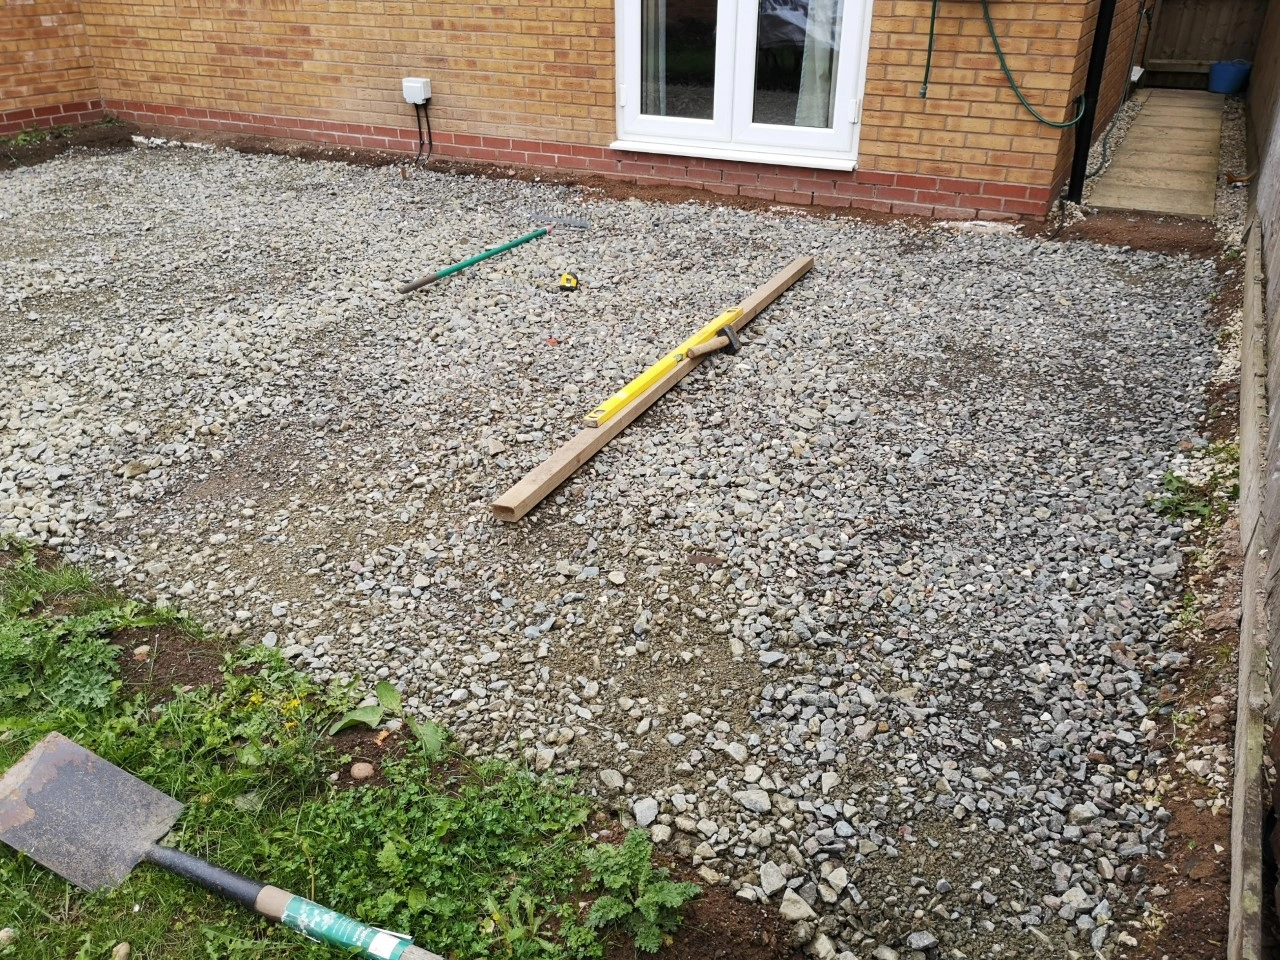 Sub base fitted over the startings of a patio being fitted in a garden.